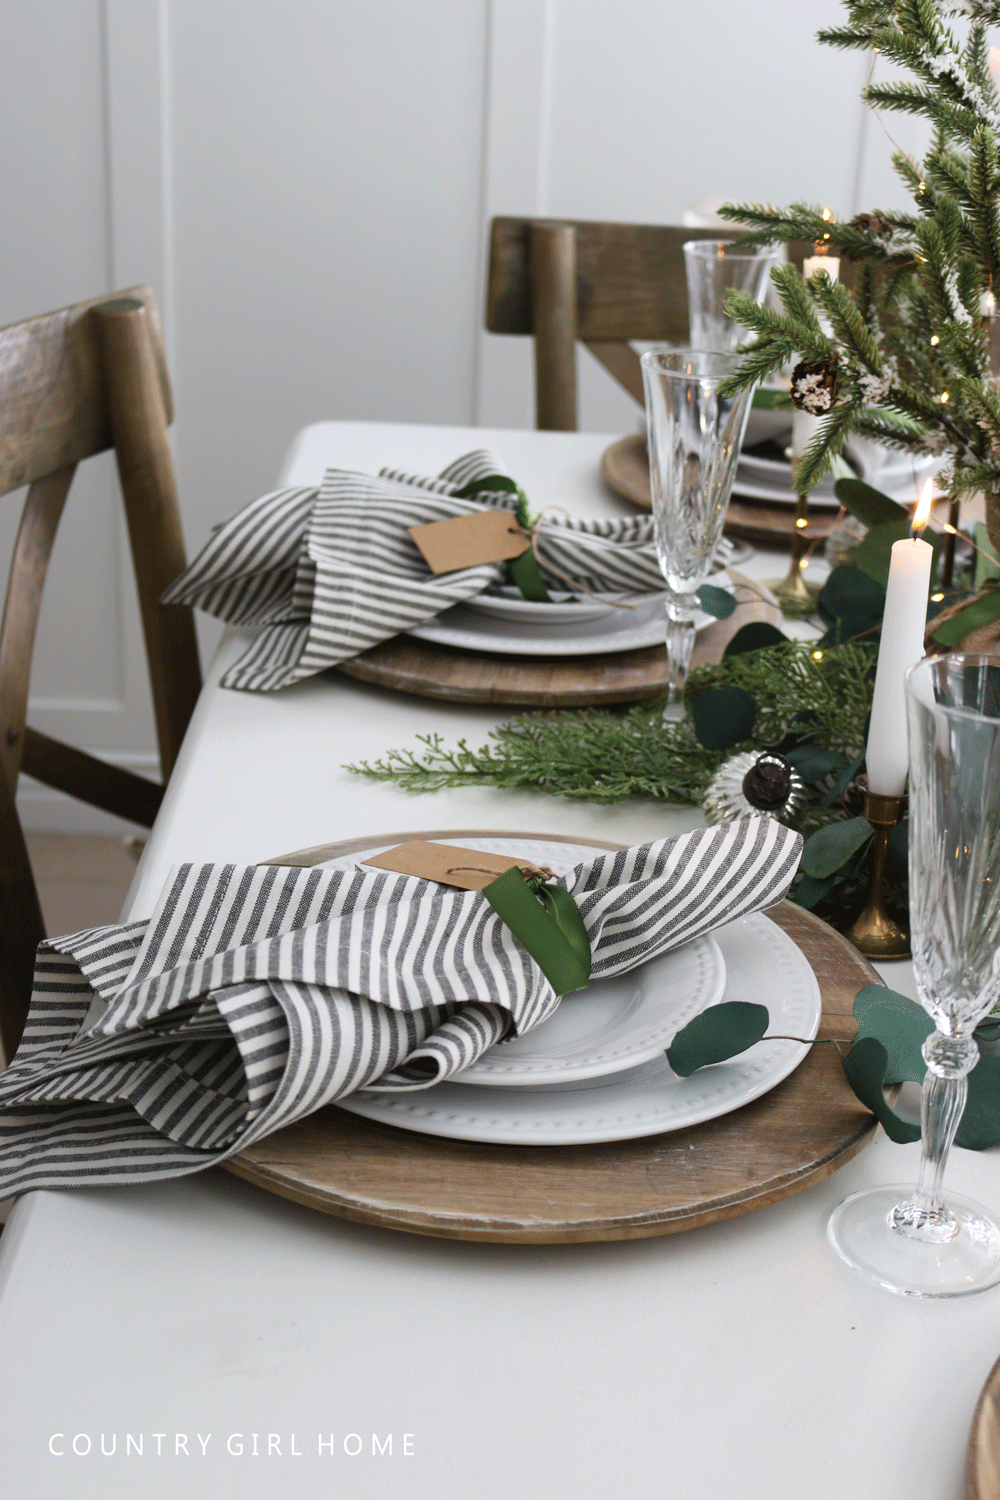 COUNTRY GIRL HOME : HOLIDAY TABLE | 2018